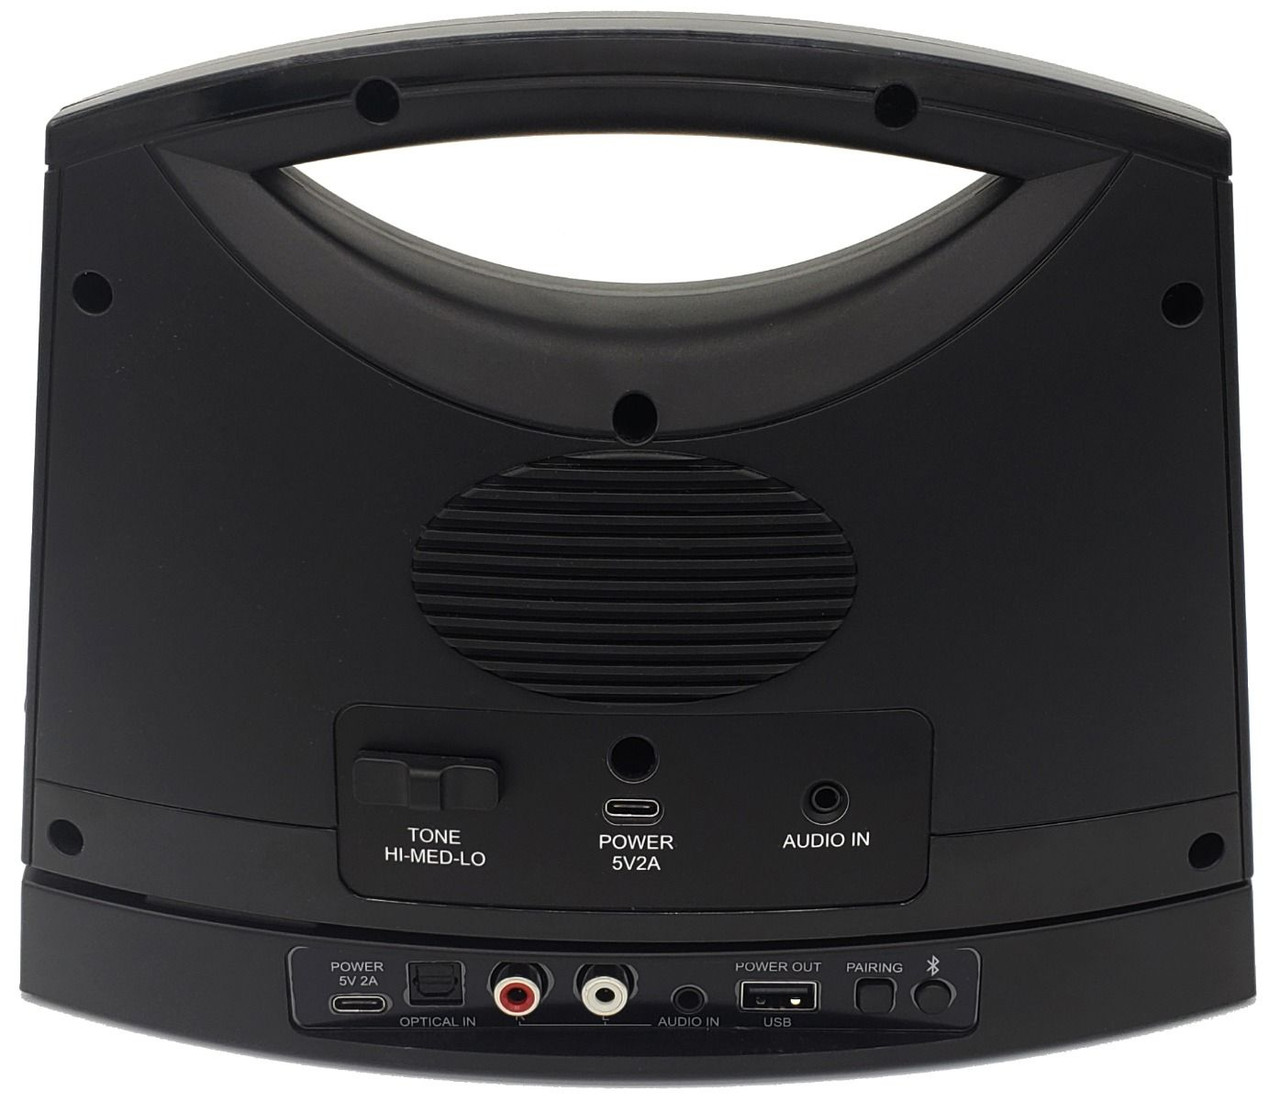 Sereonic TV SoundBox® by Serene - BT100 (Rear view showing ports and settings)